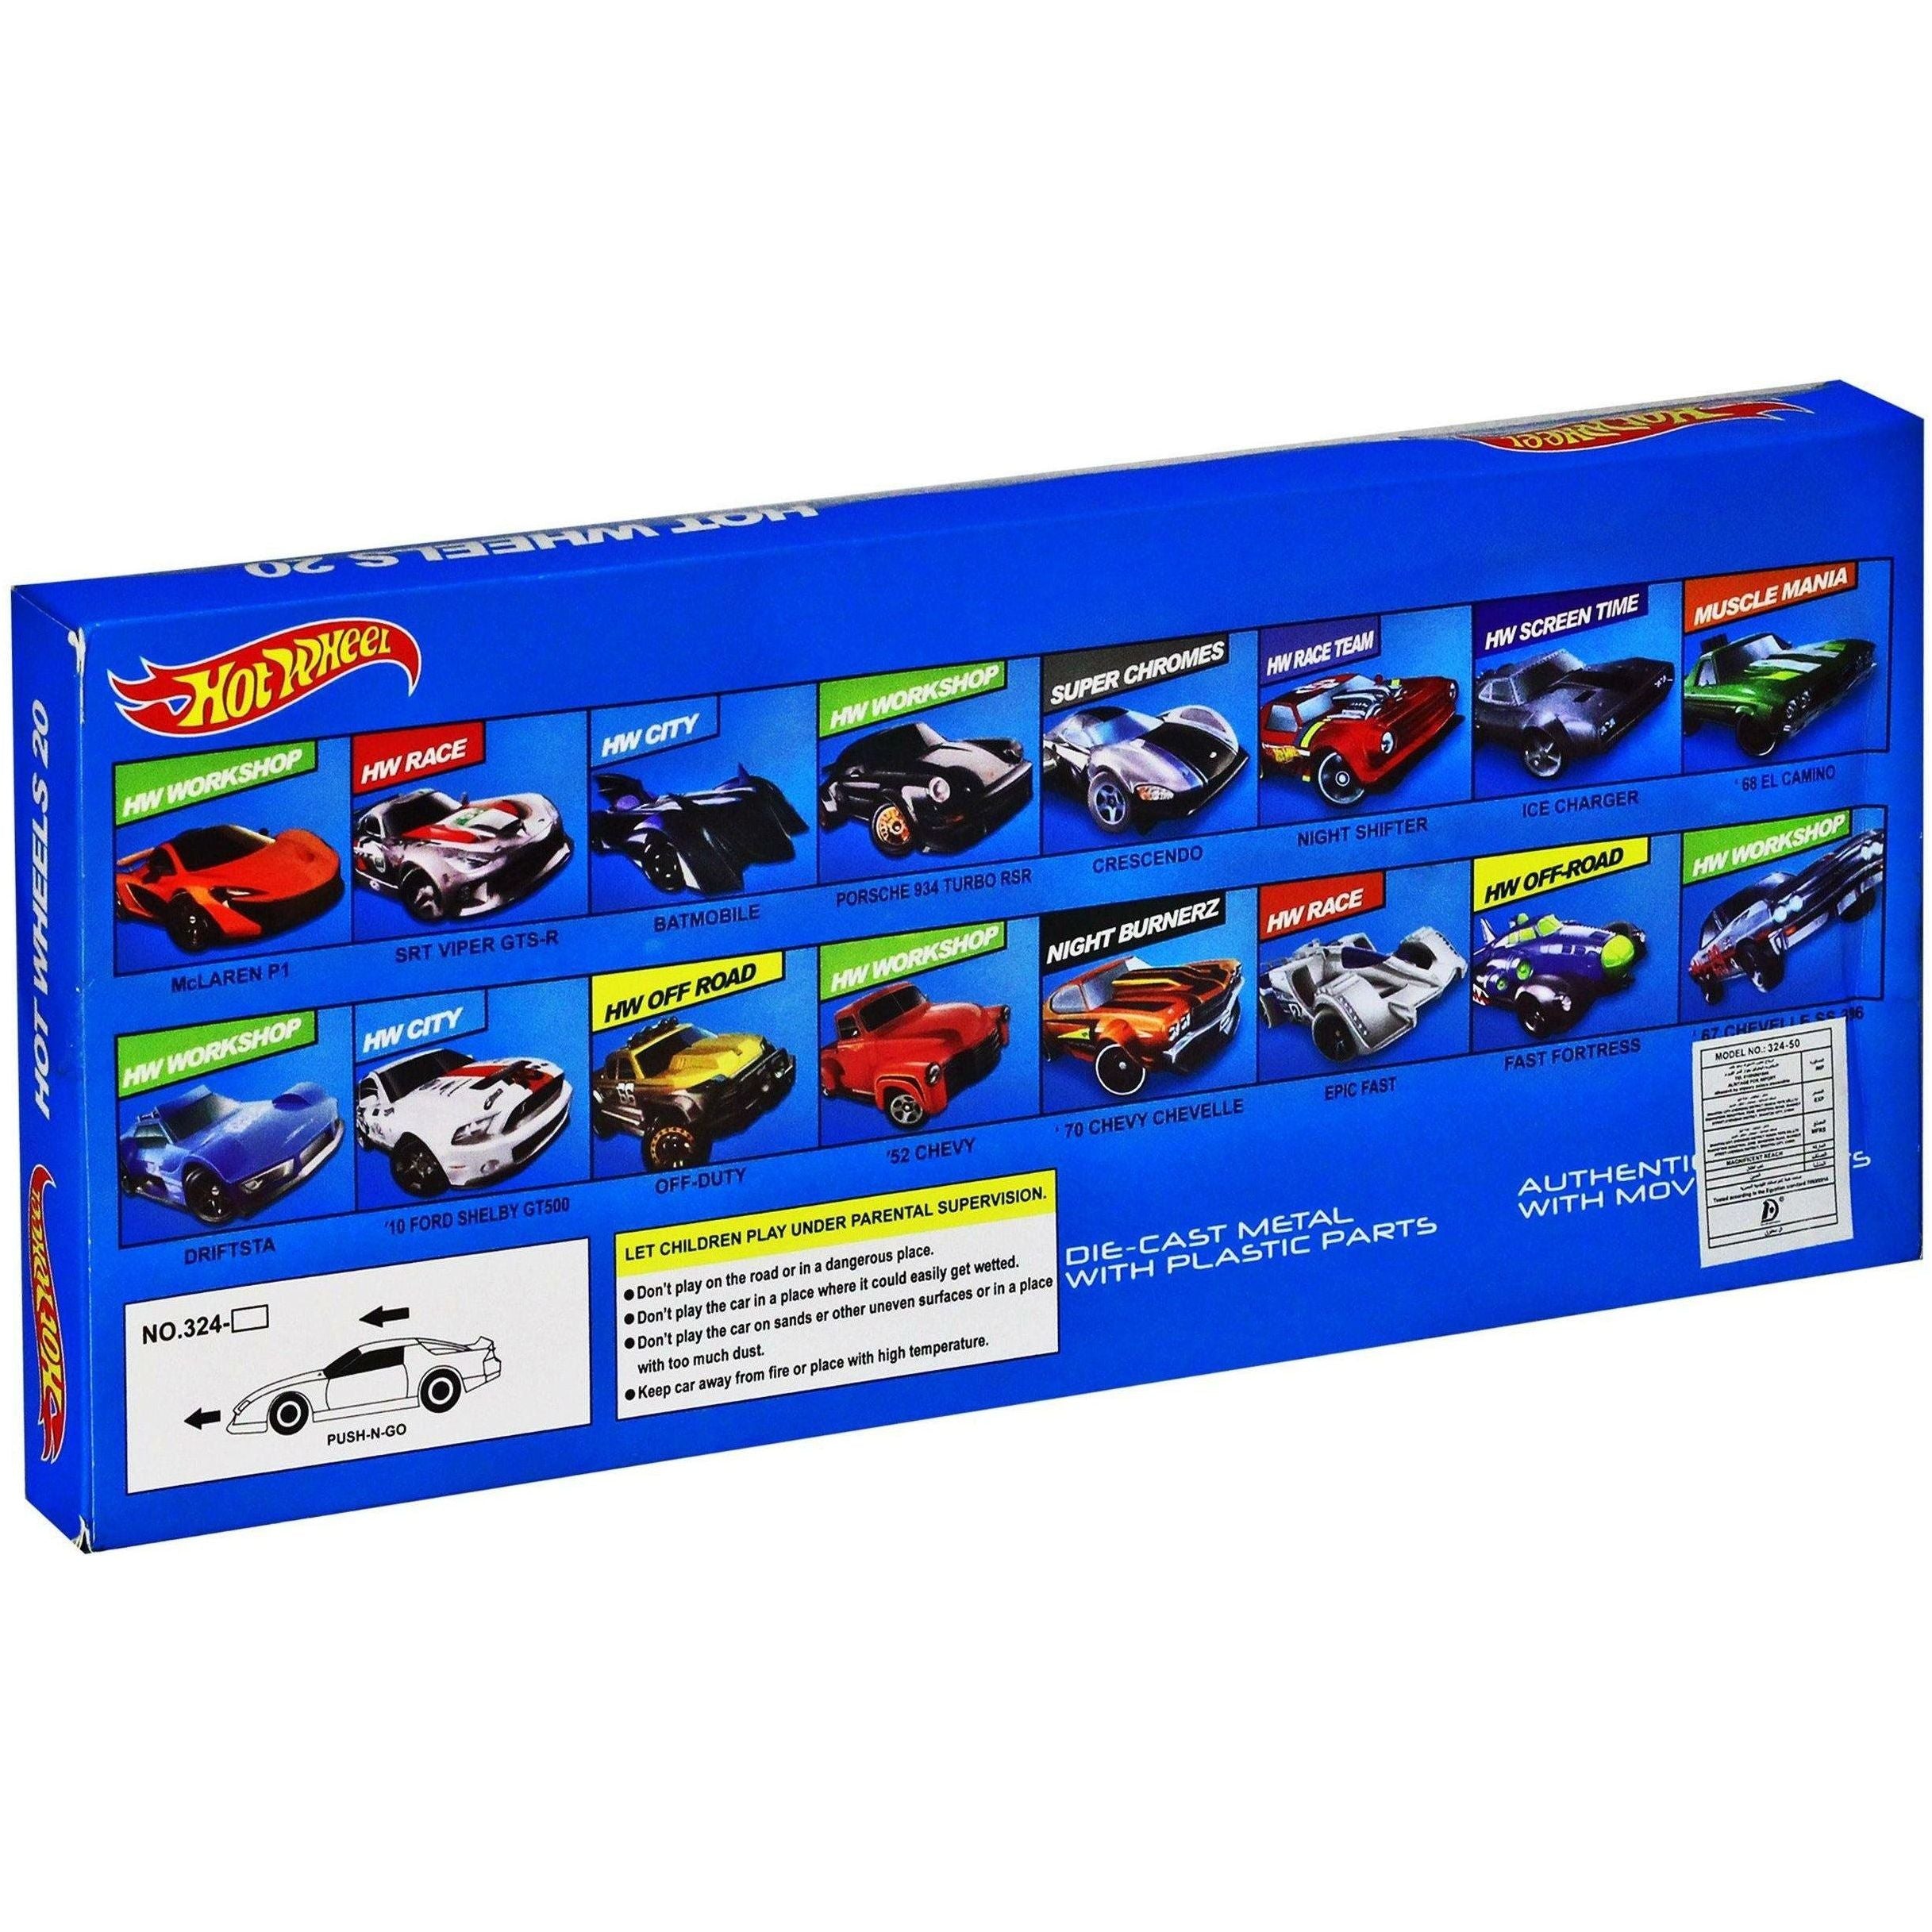 Hot Wheel 20 Cars Pack 1:64 Scale Die Cast Cars Hot Wheels Set - BumbleToys - 5-7 Years, 8-13 Years, Boys, Collectible Vehicles, Pre-Order, Toy Land